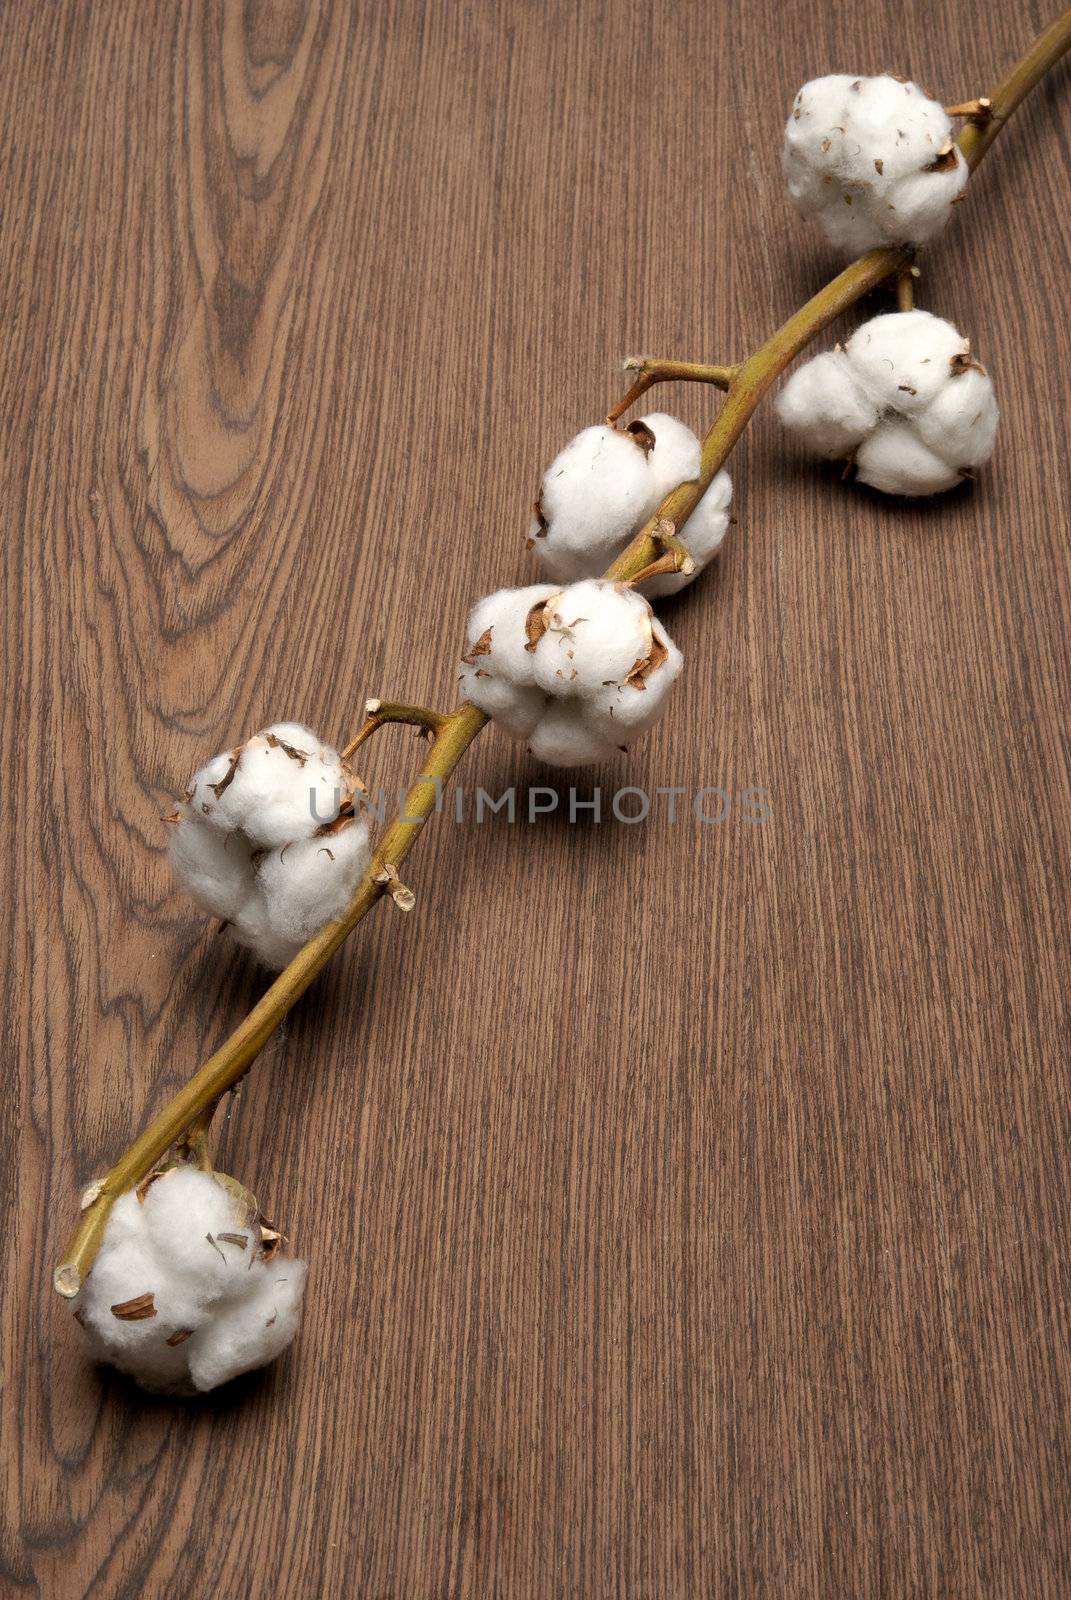 Cotton plant on a wooden background